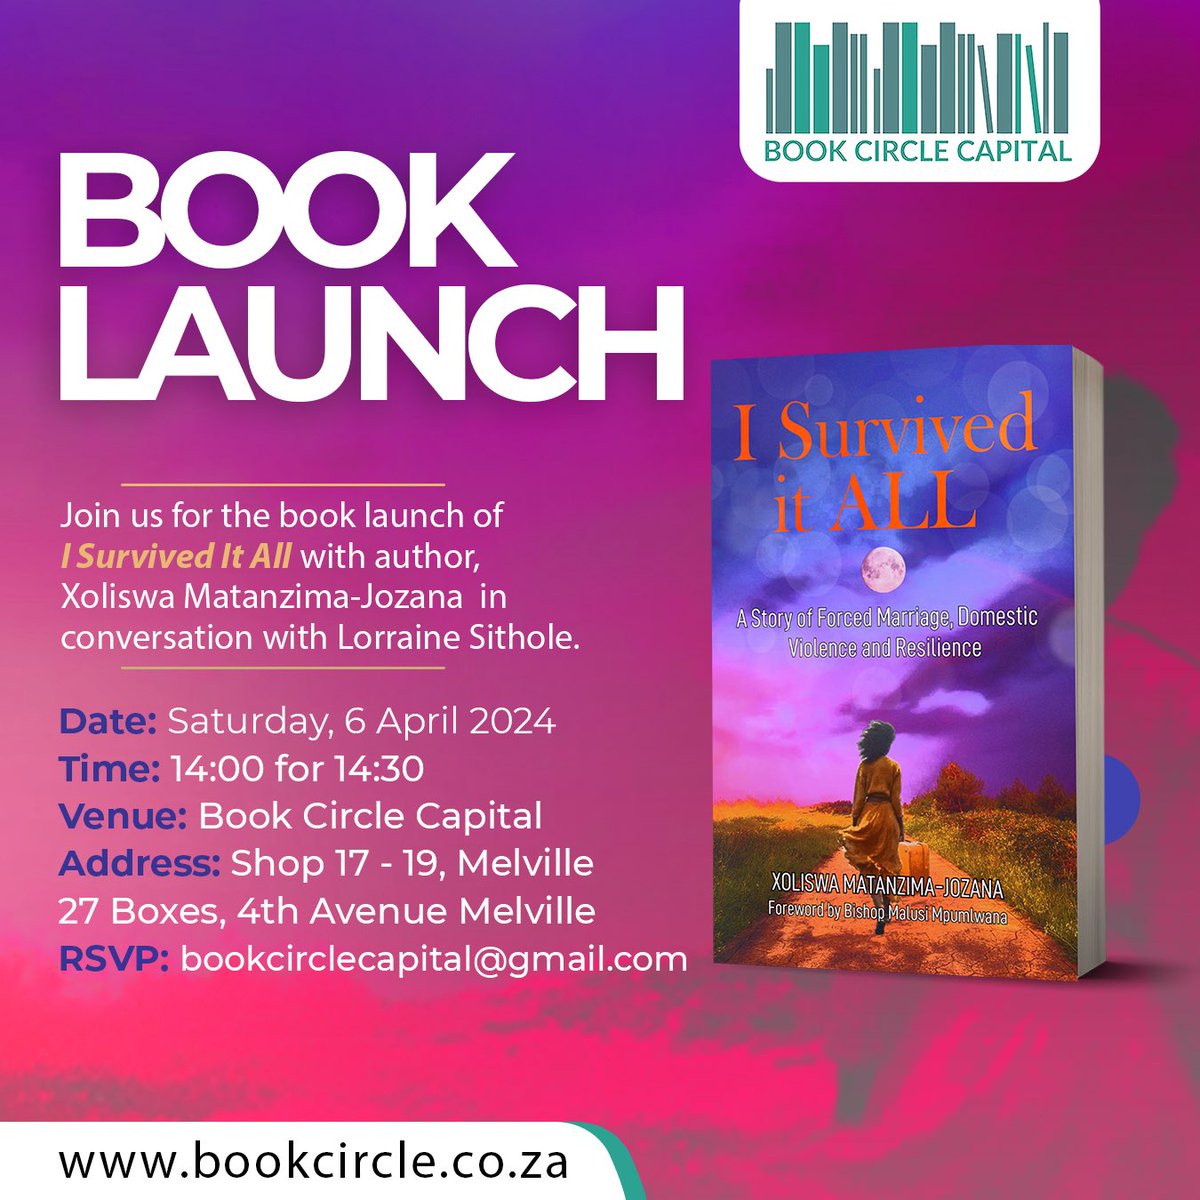 Bookish events happening this week ❤️📚
@FredKhumalo @LS3841